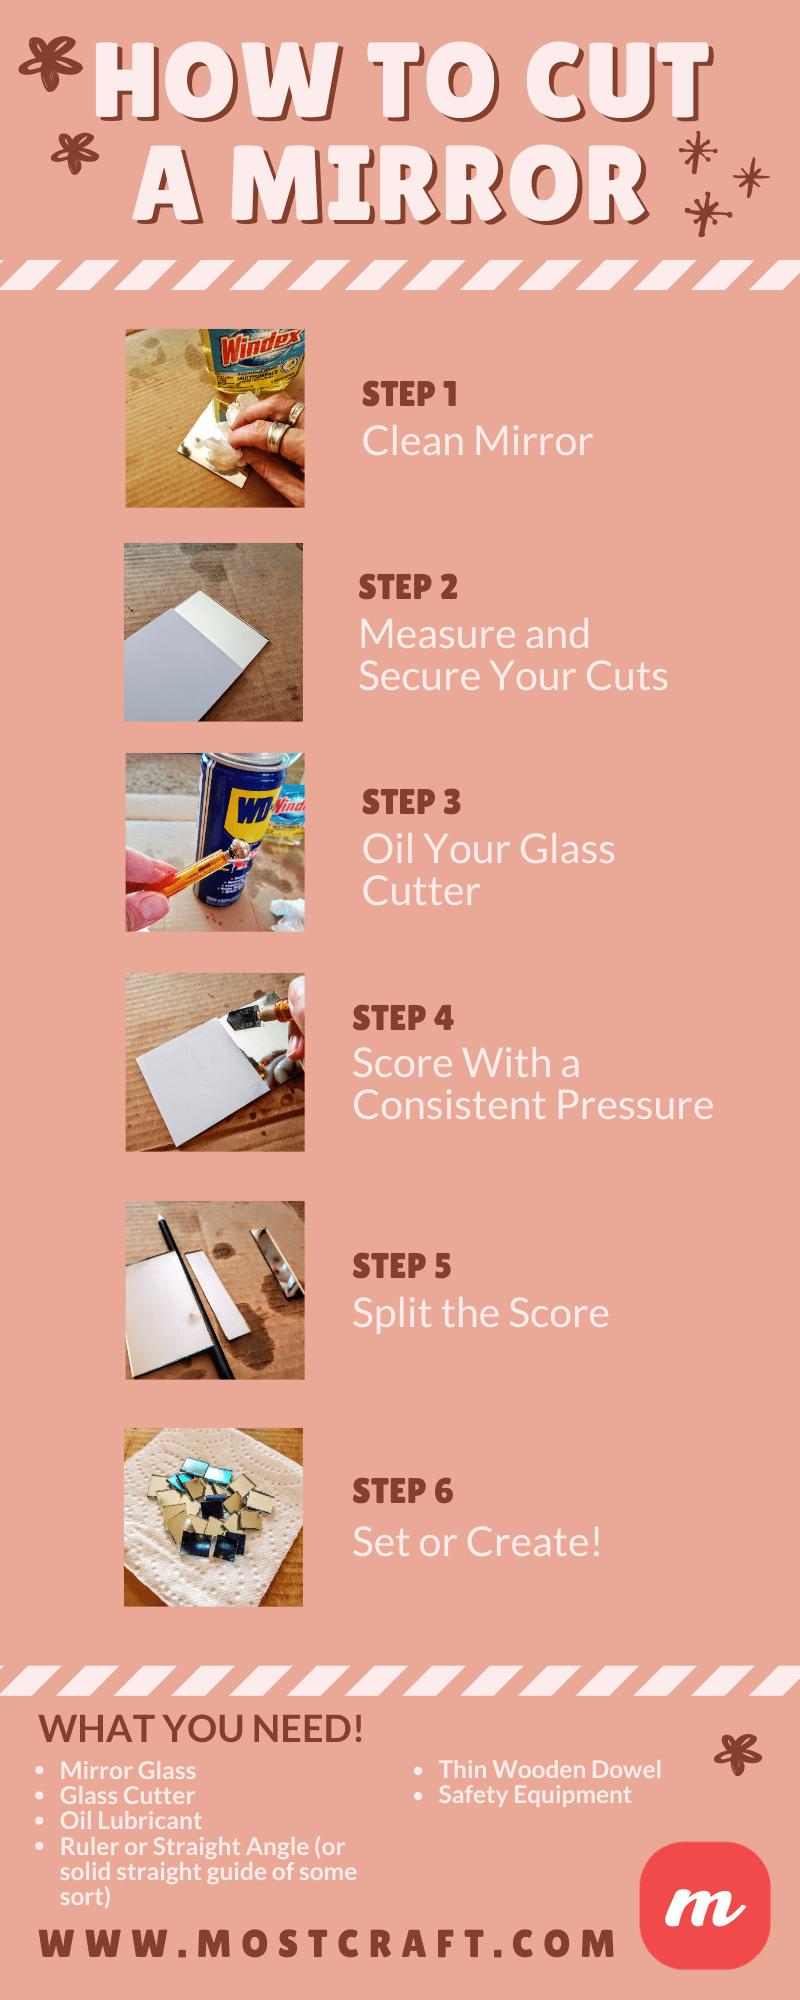 How to Cut a Mirror - Infographic